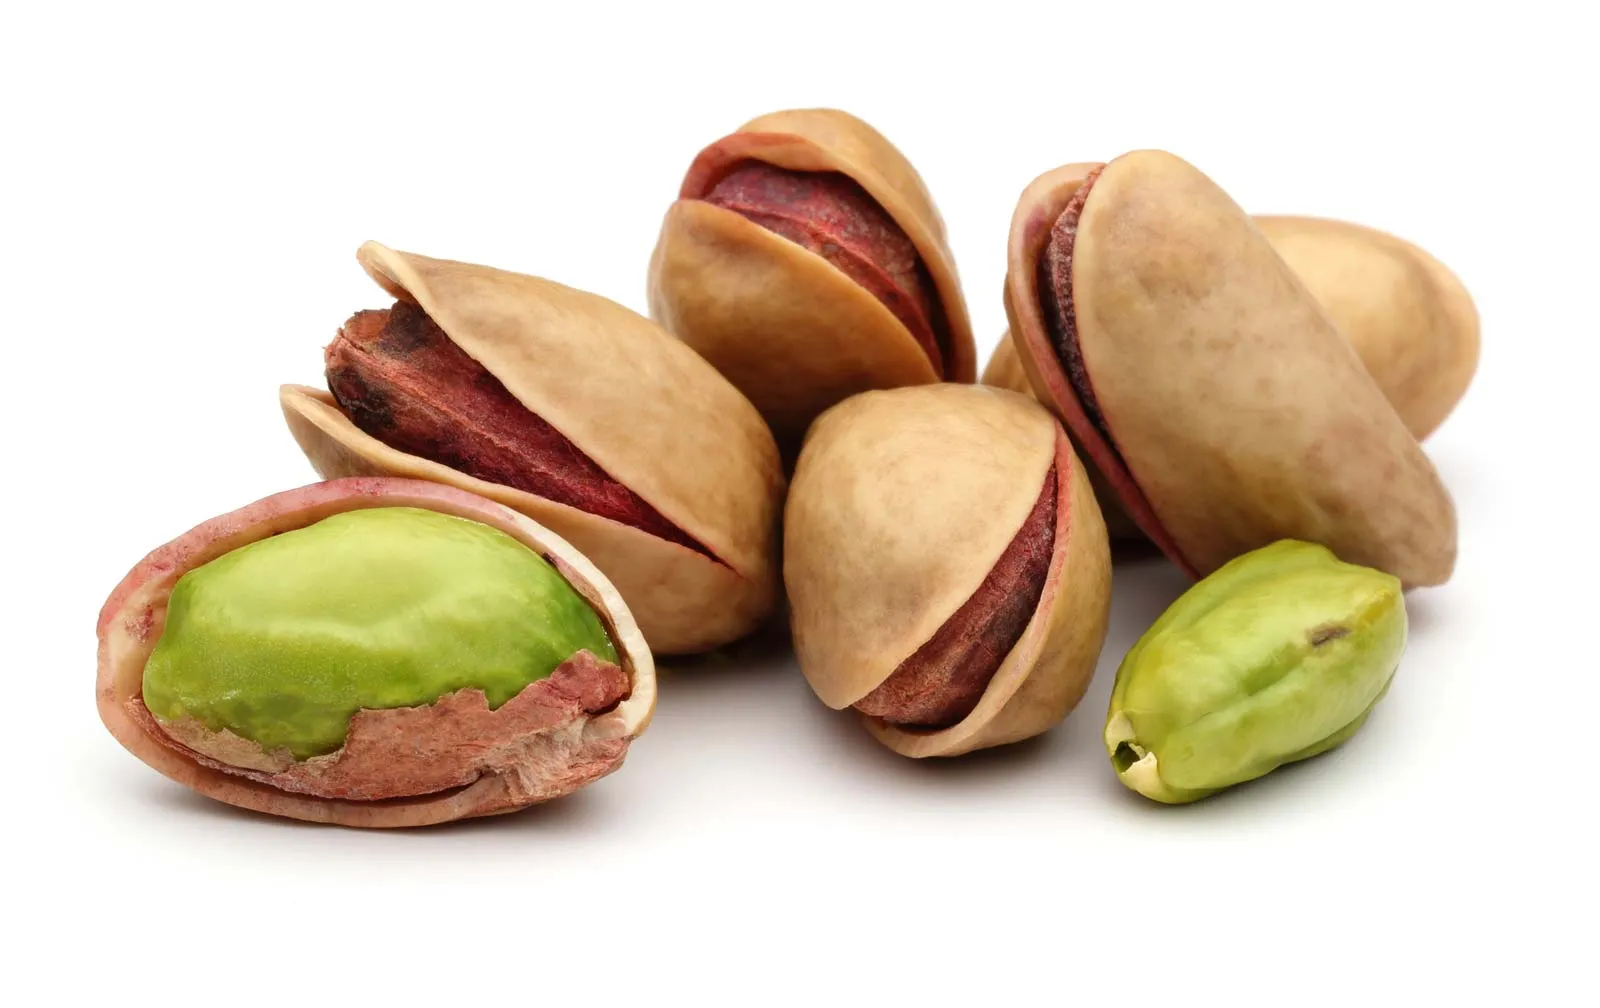 ARE PISTACHIOS GOOD FOR KETO DIET